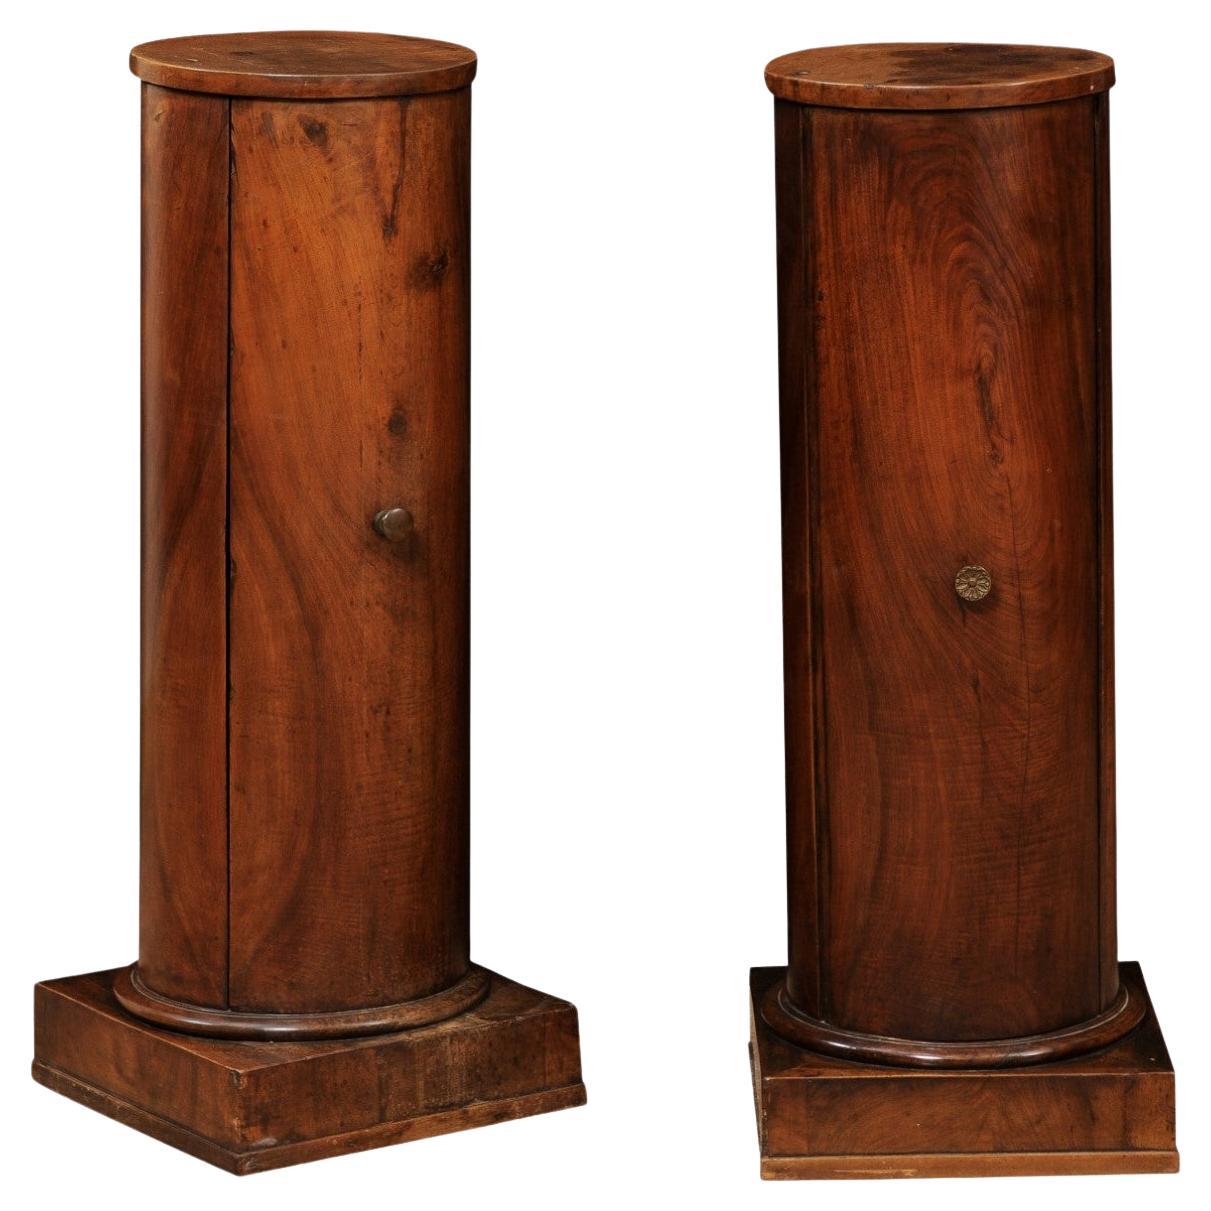 Pair of Early 19th Century Italian Neoclassical Walnut Pedestal Cabinets